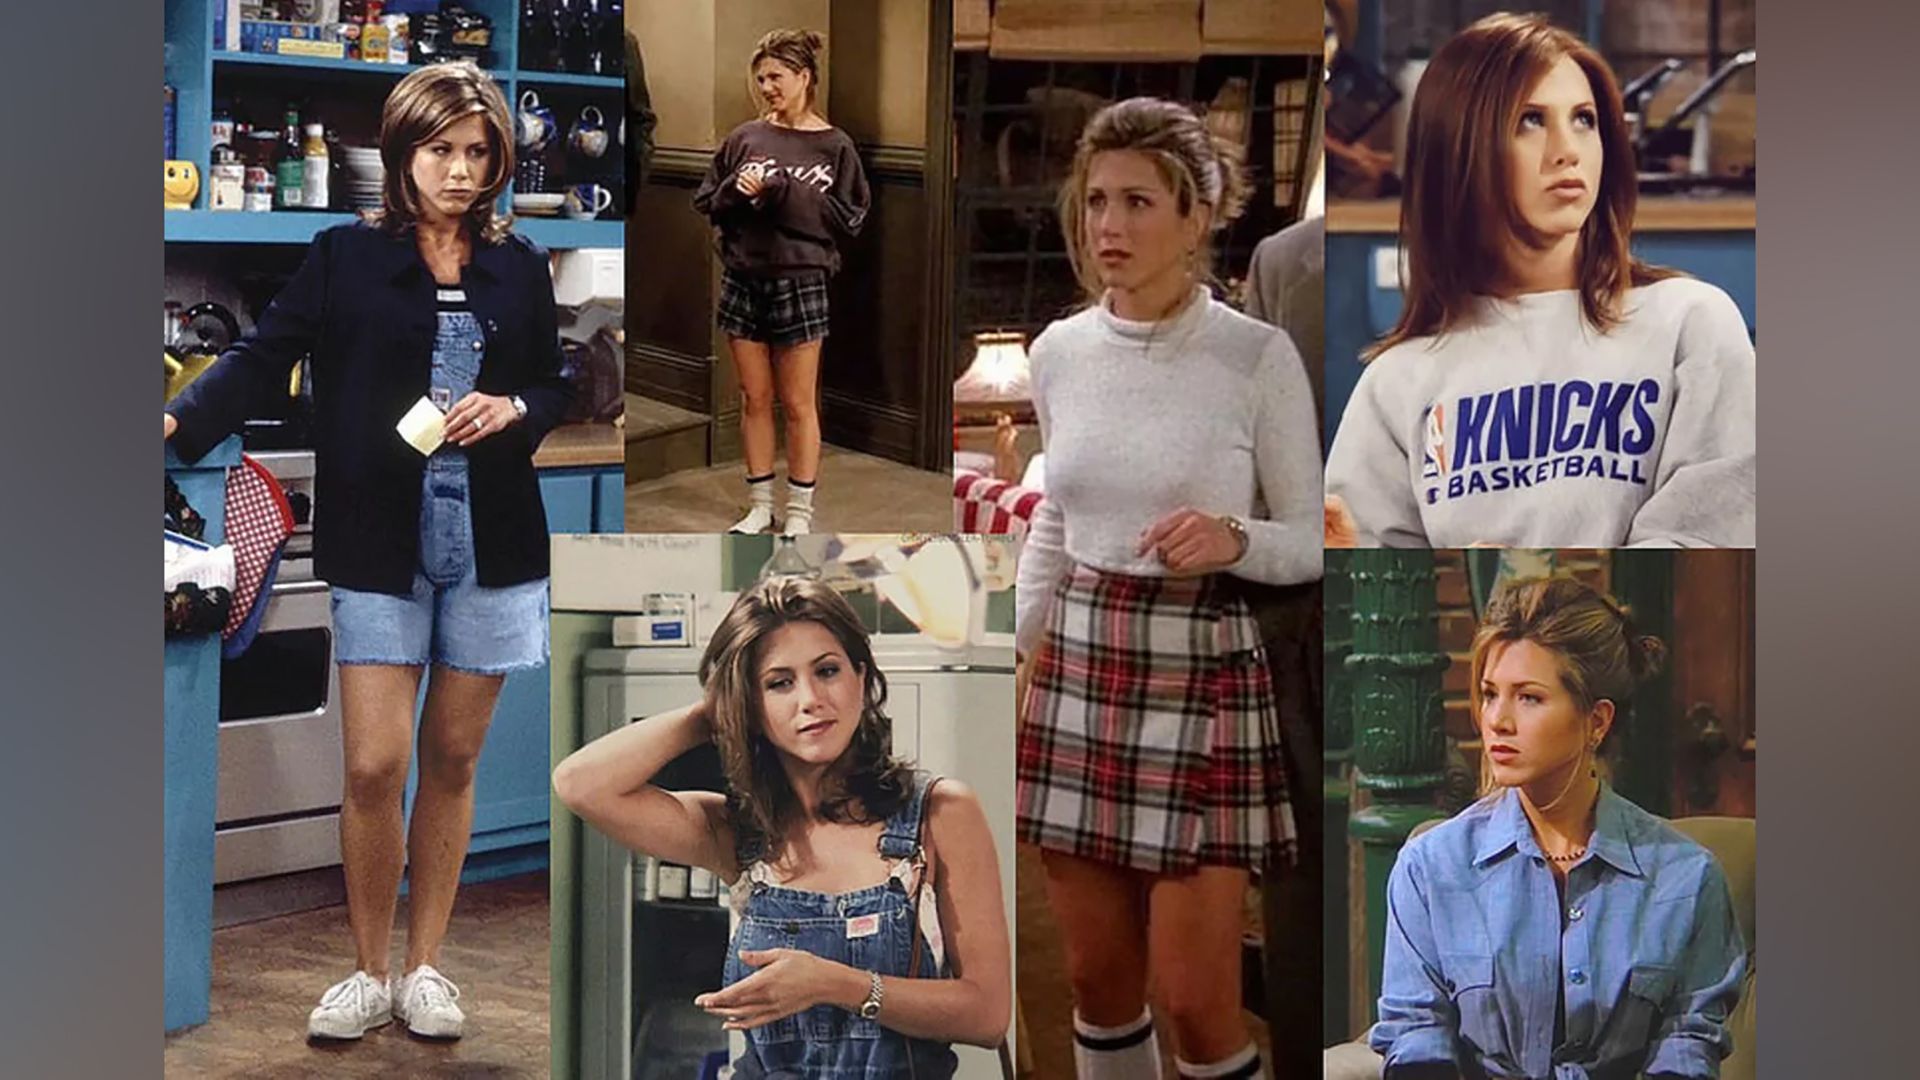 After 'Friends', Jennifer Aniston became an icon for an entire generation